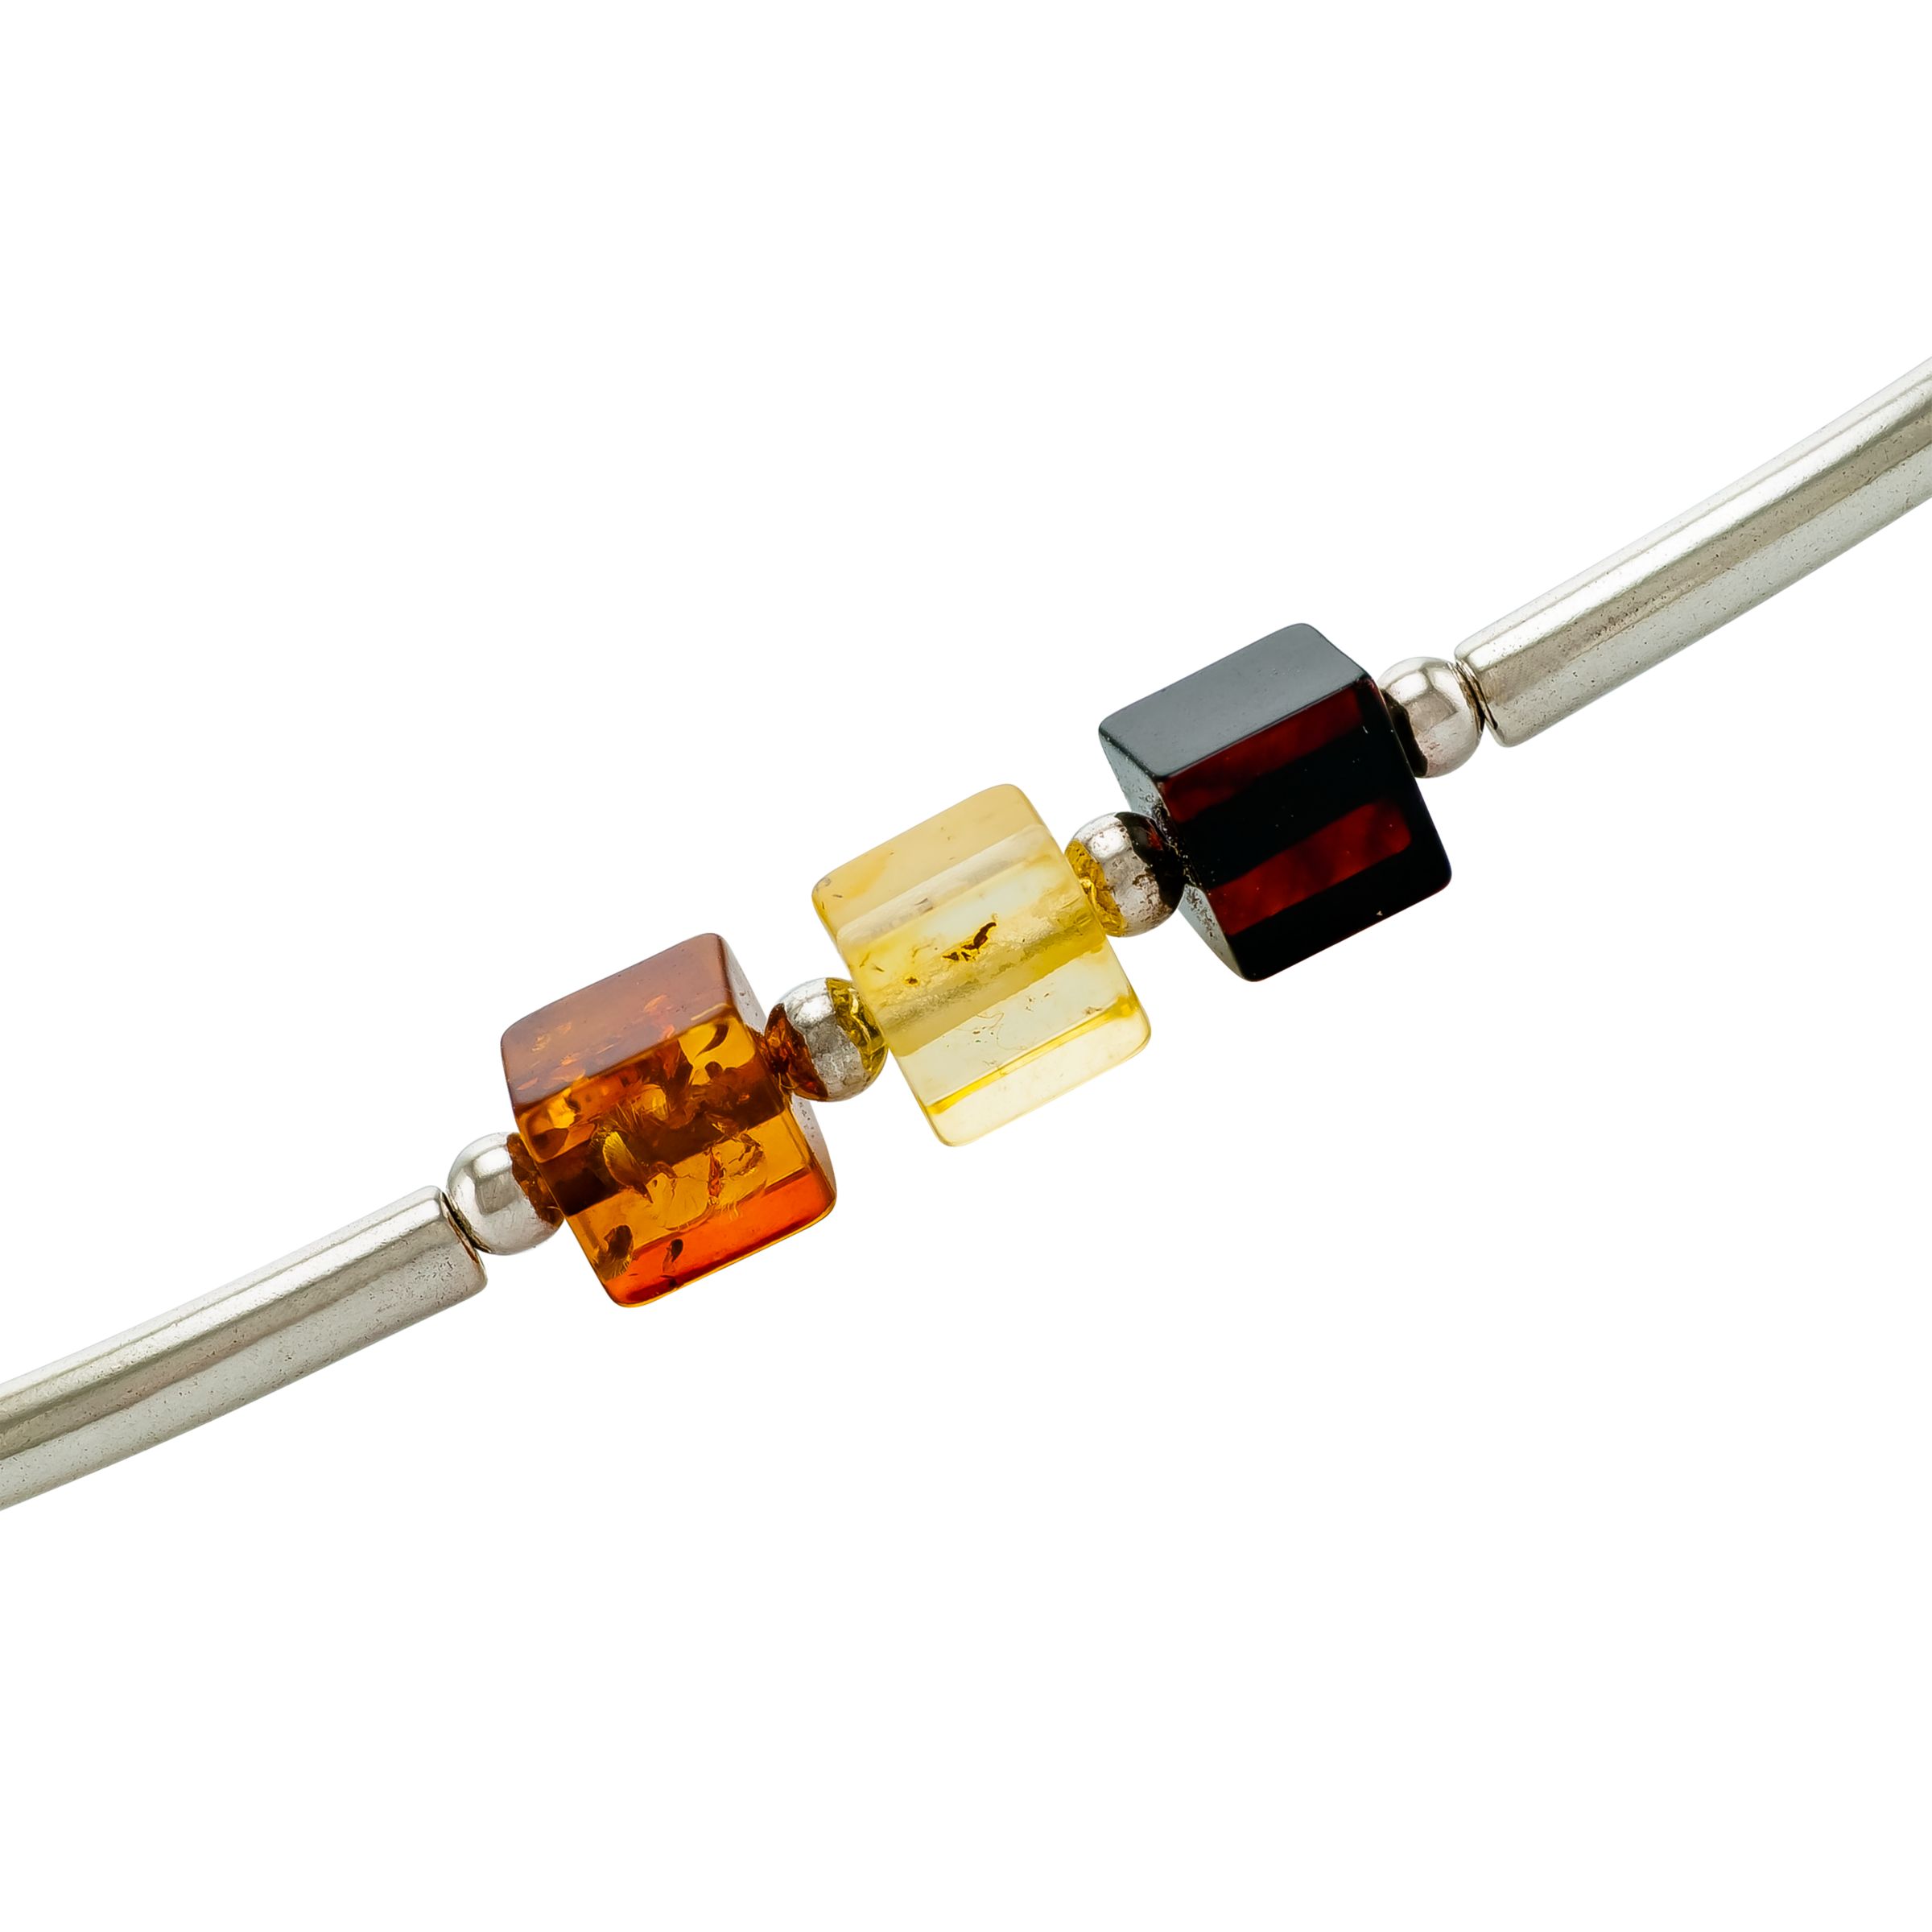 Buy Be-Jewelled Sterling Silver Baltic Amber Triple Cube Bracelet, Silver/Multi Online at johnlewis.com